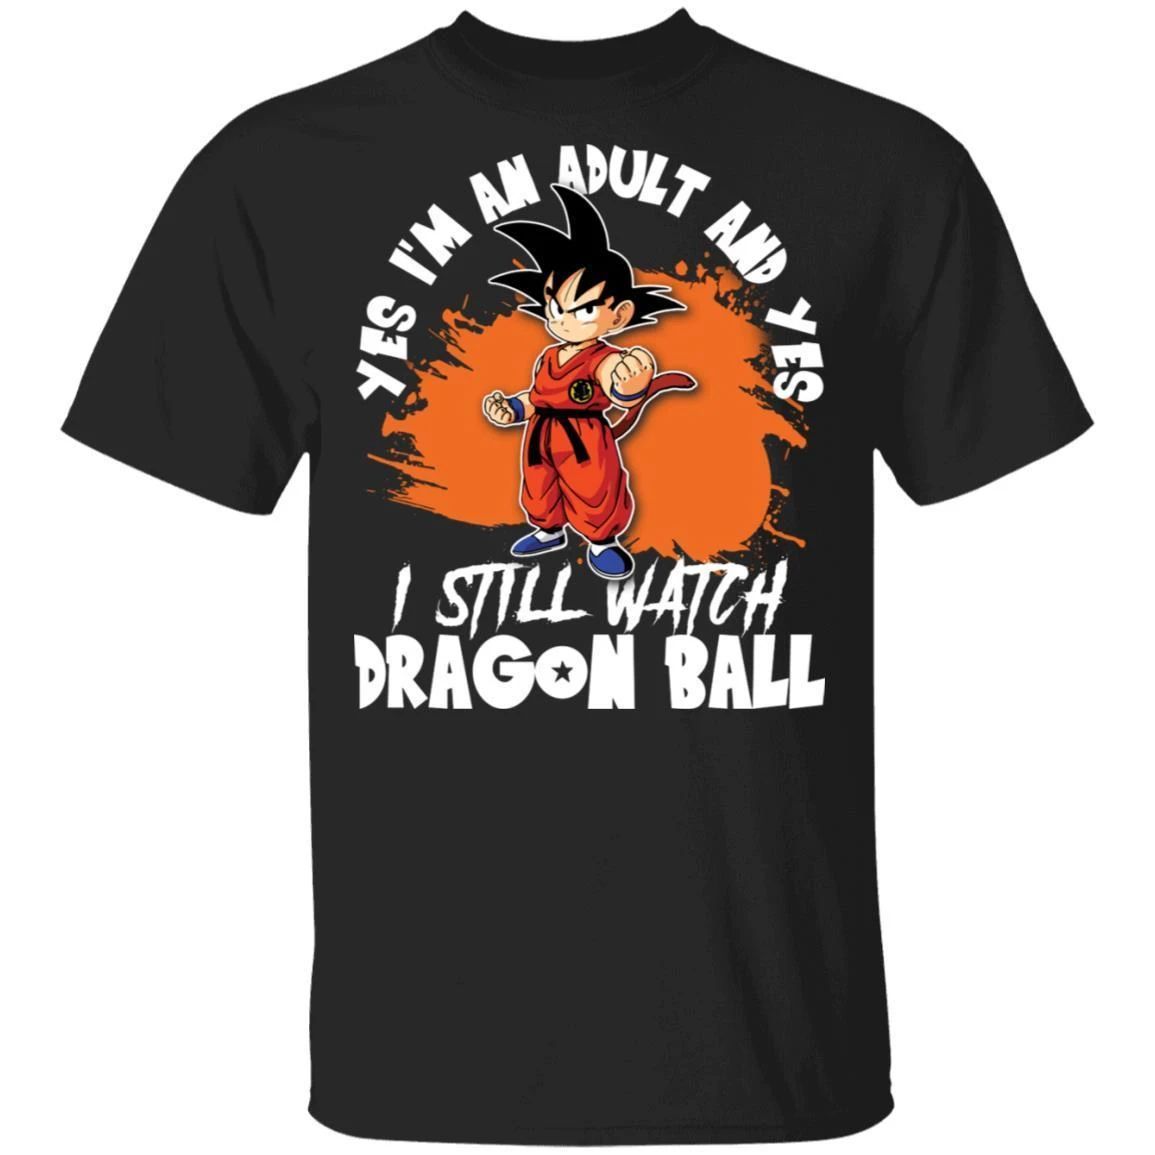 Yes I’m An Adult And Yes I Still Watch Dragon Ball Shirt Son Goku Tee